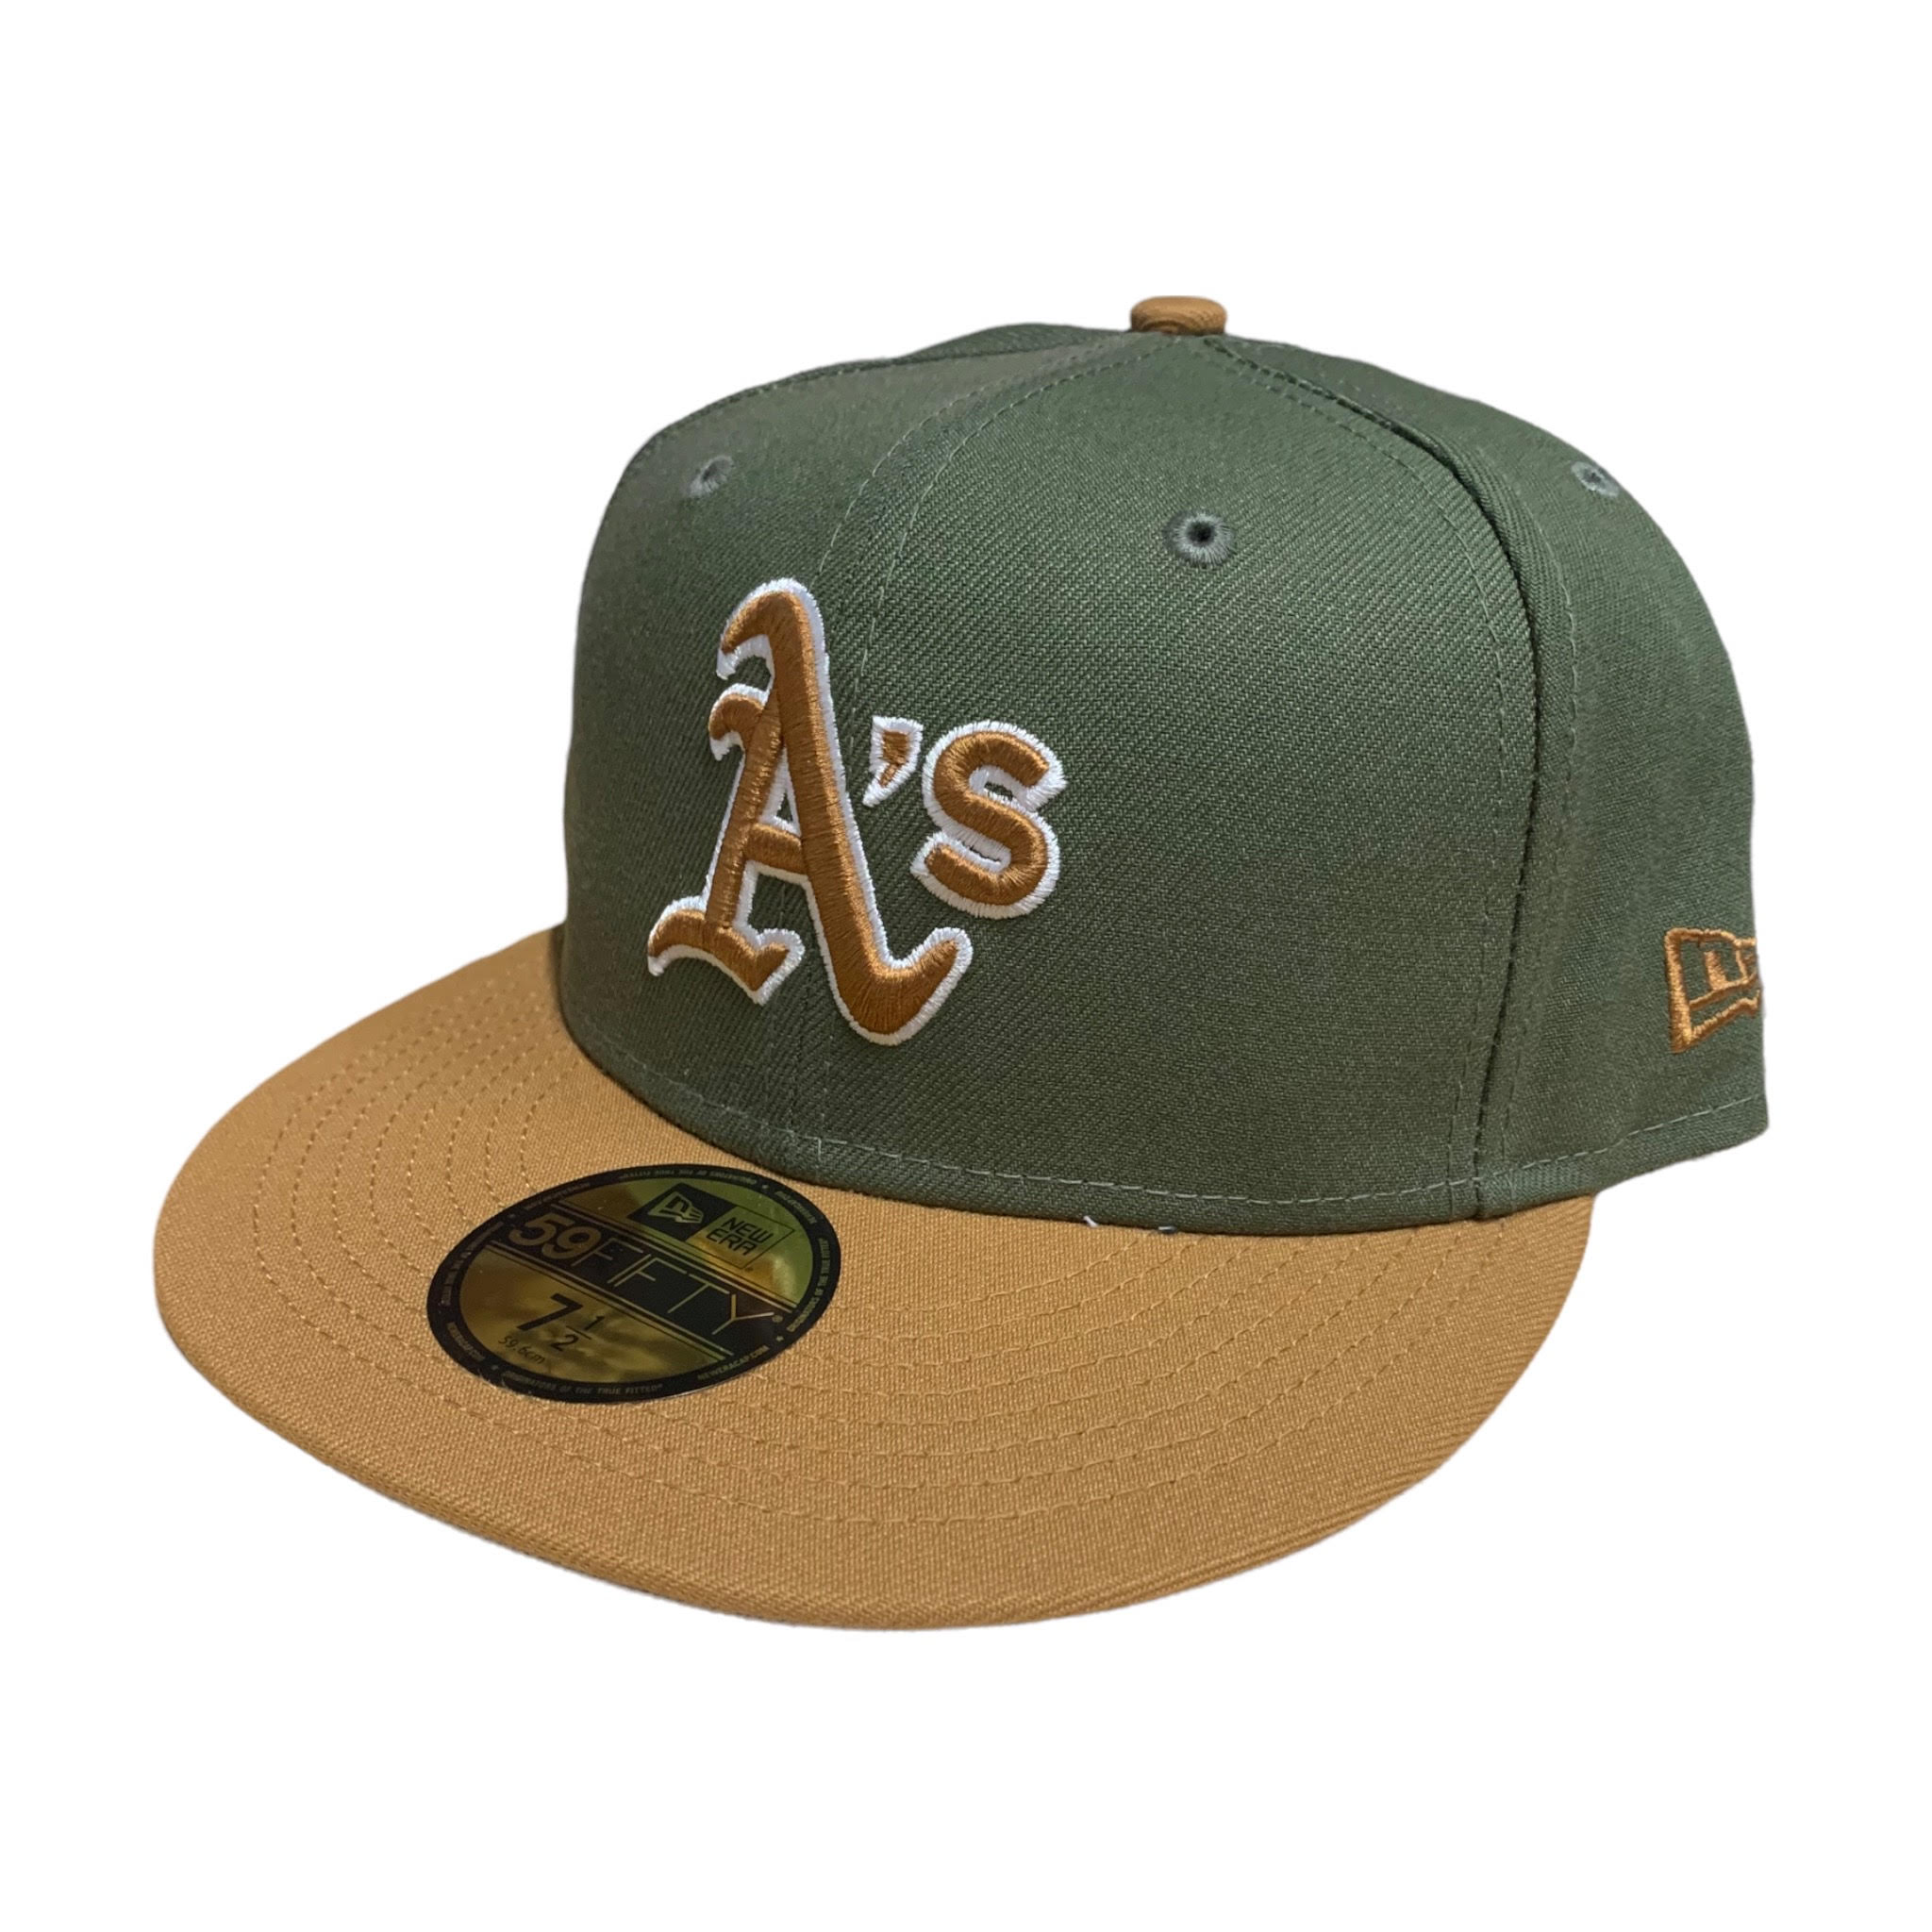 Oakland Athletics 2-Tone Color Pack 59FIFTY Fitted Hat - Brown/ Charcoal LBZSTC / 7 1/8